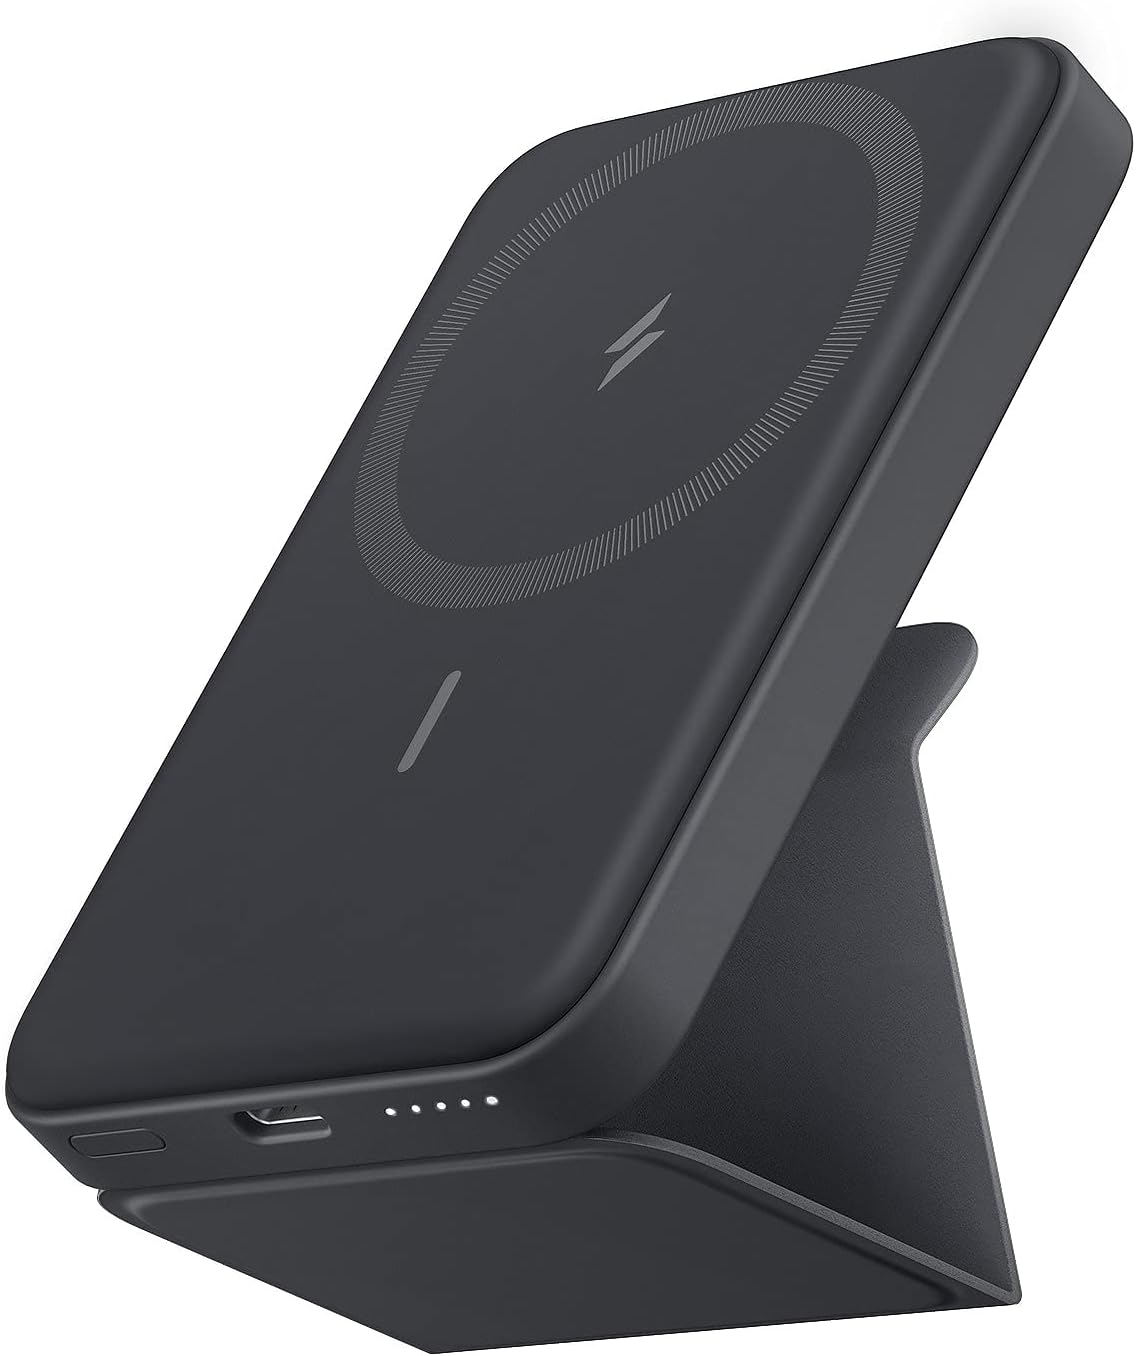 Anker 622 Magnetic Battery (MagGo), 5000mAh Foldable Magnetic Wireless Portable Charger and USB-C for iPhone 13/12 Series-Black-A1611H11-18 Months Local Warranty